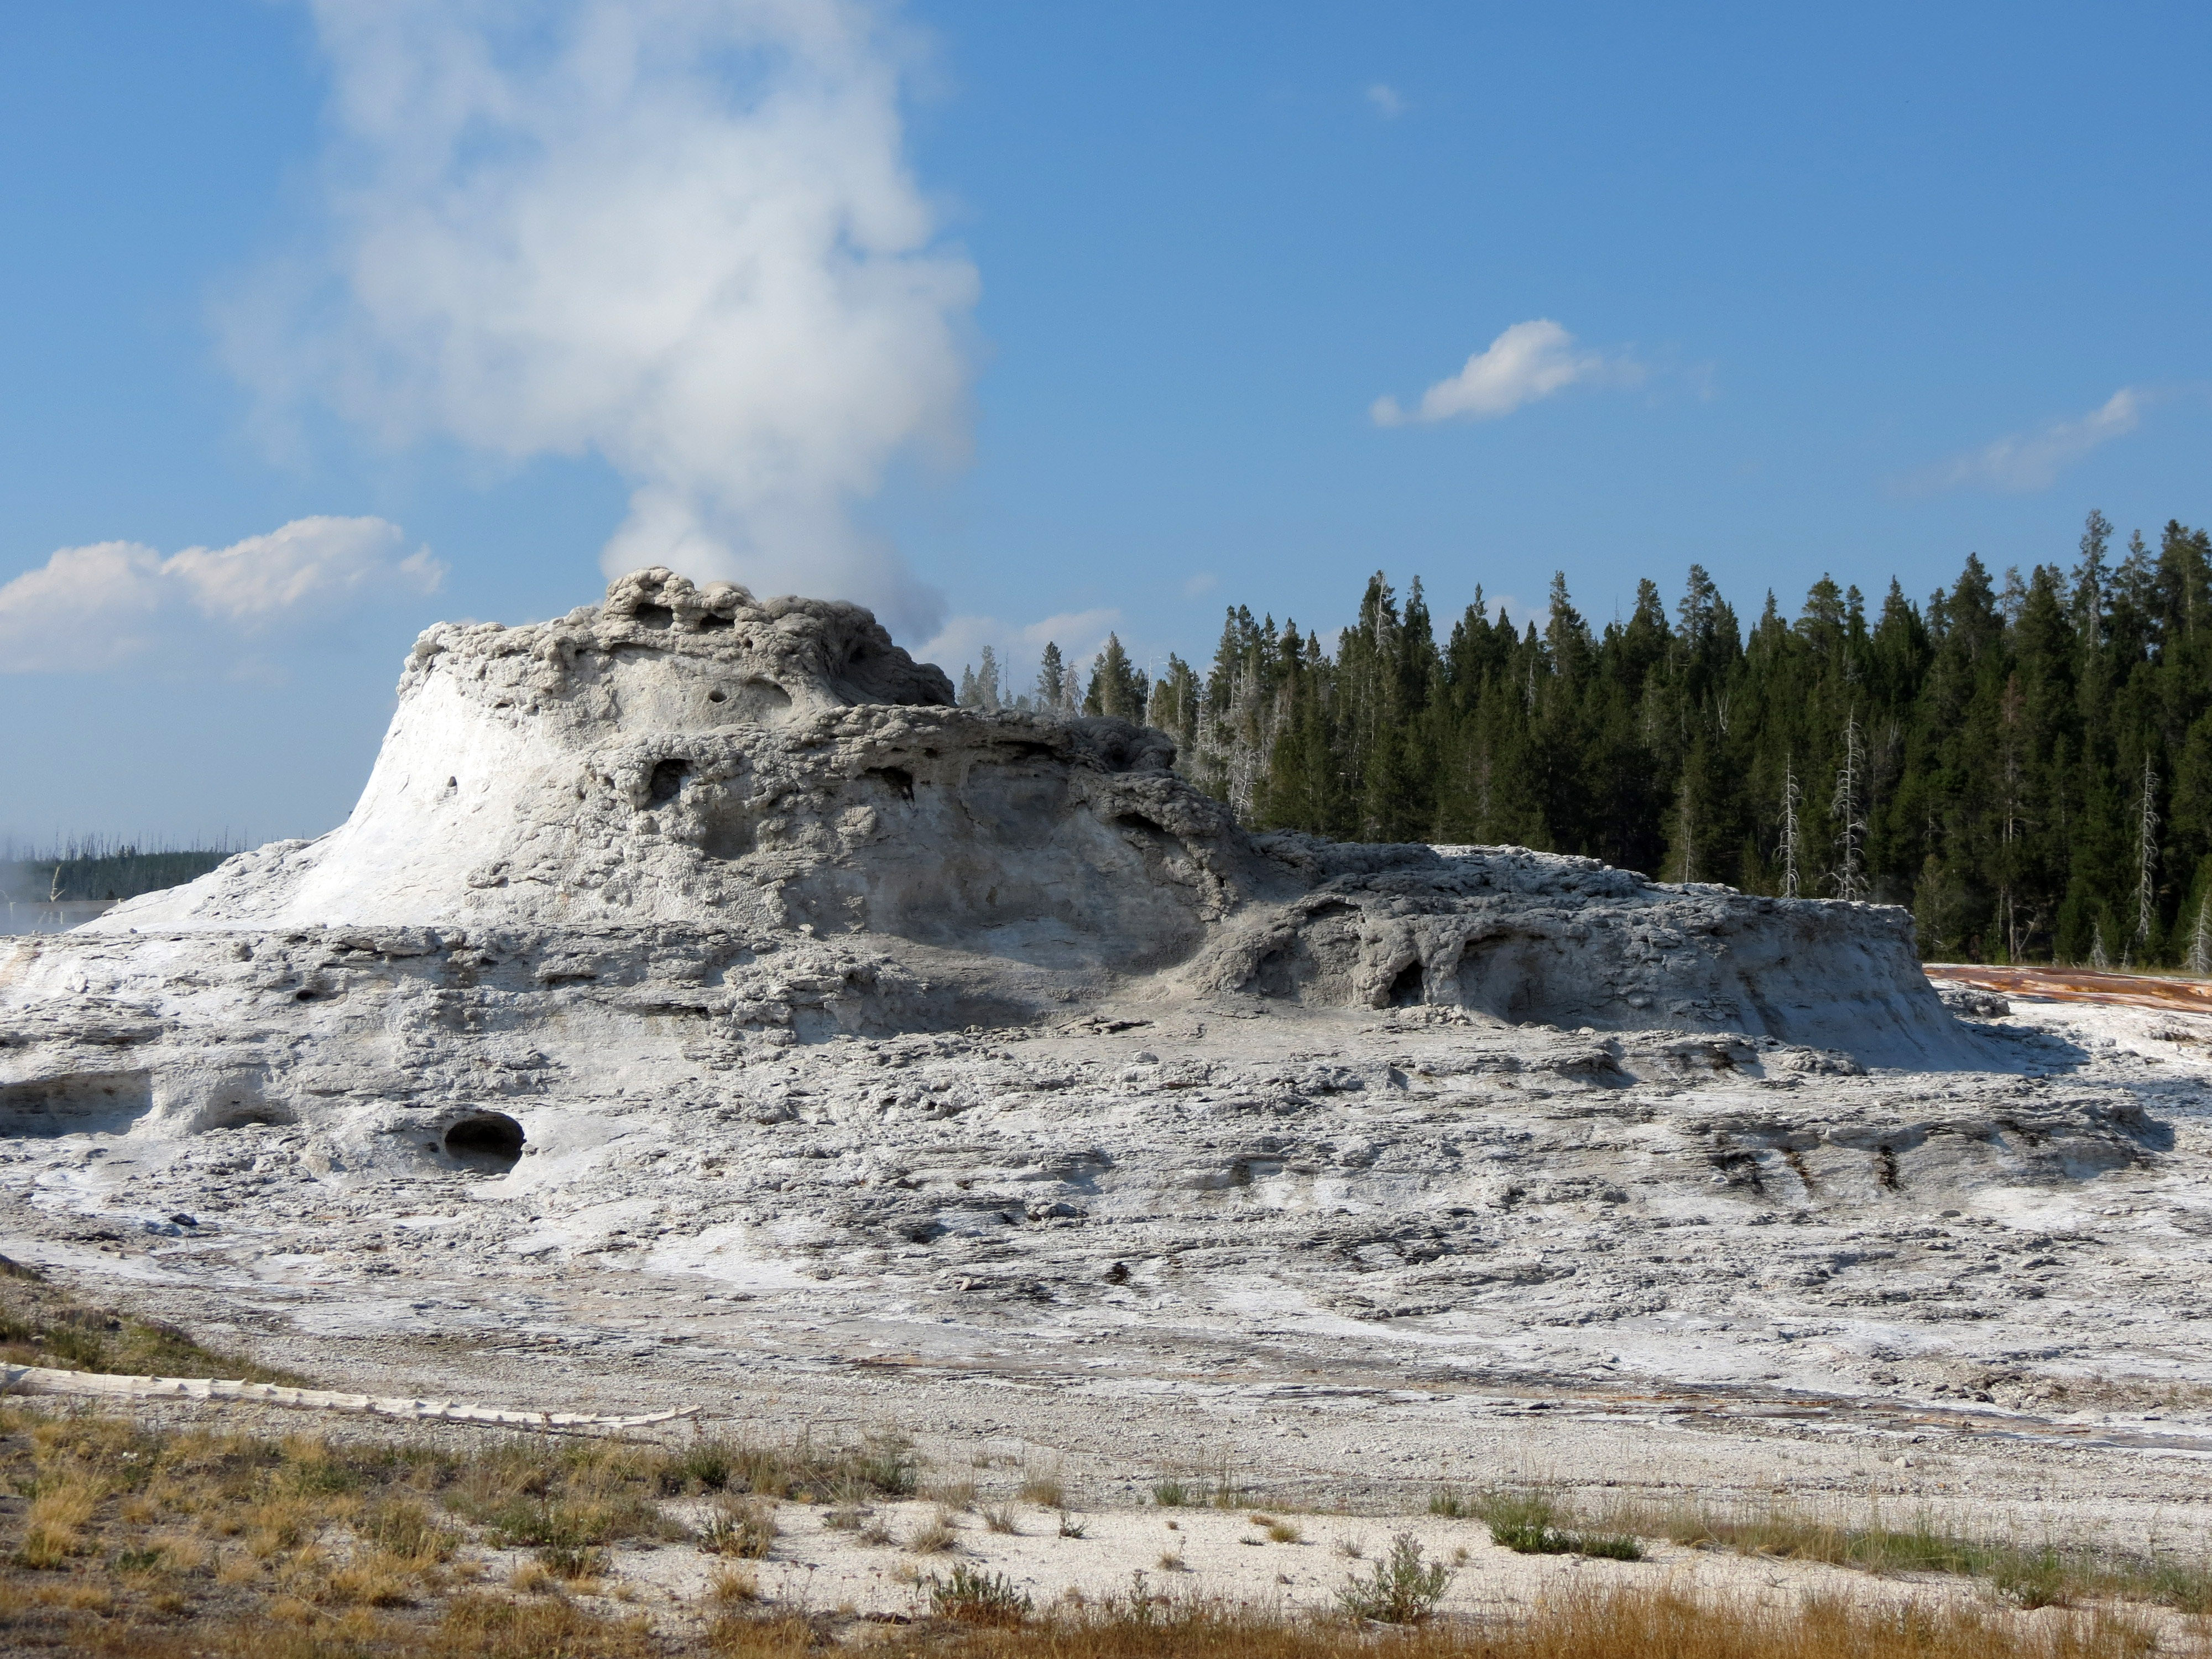 Thermal Features In Yellowstone National Park Wyoming Image Free